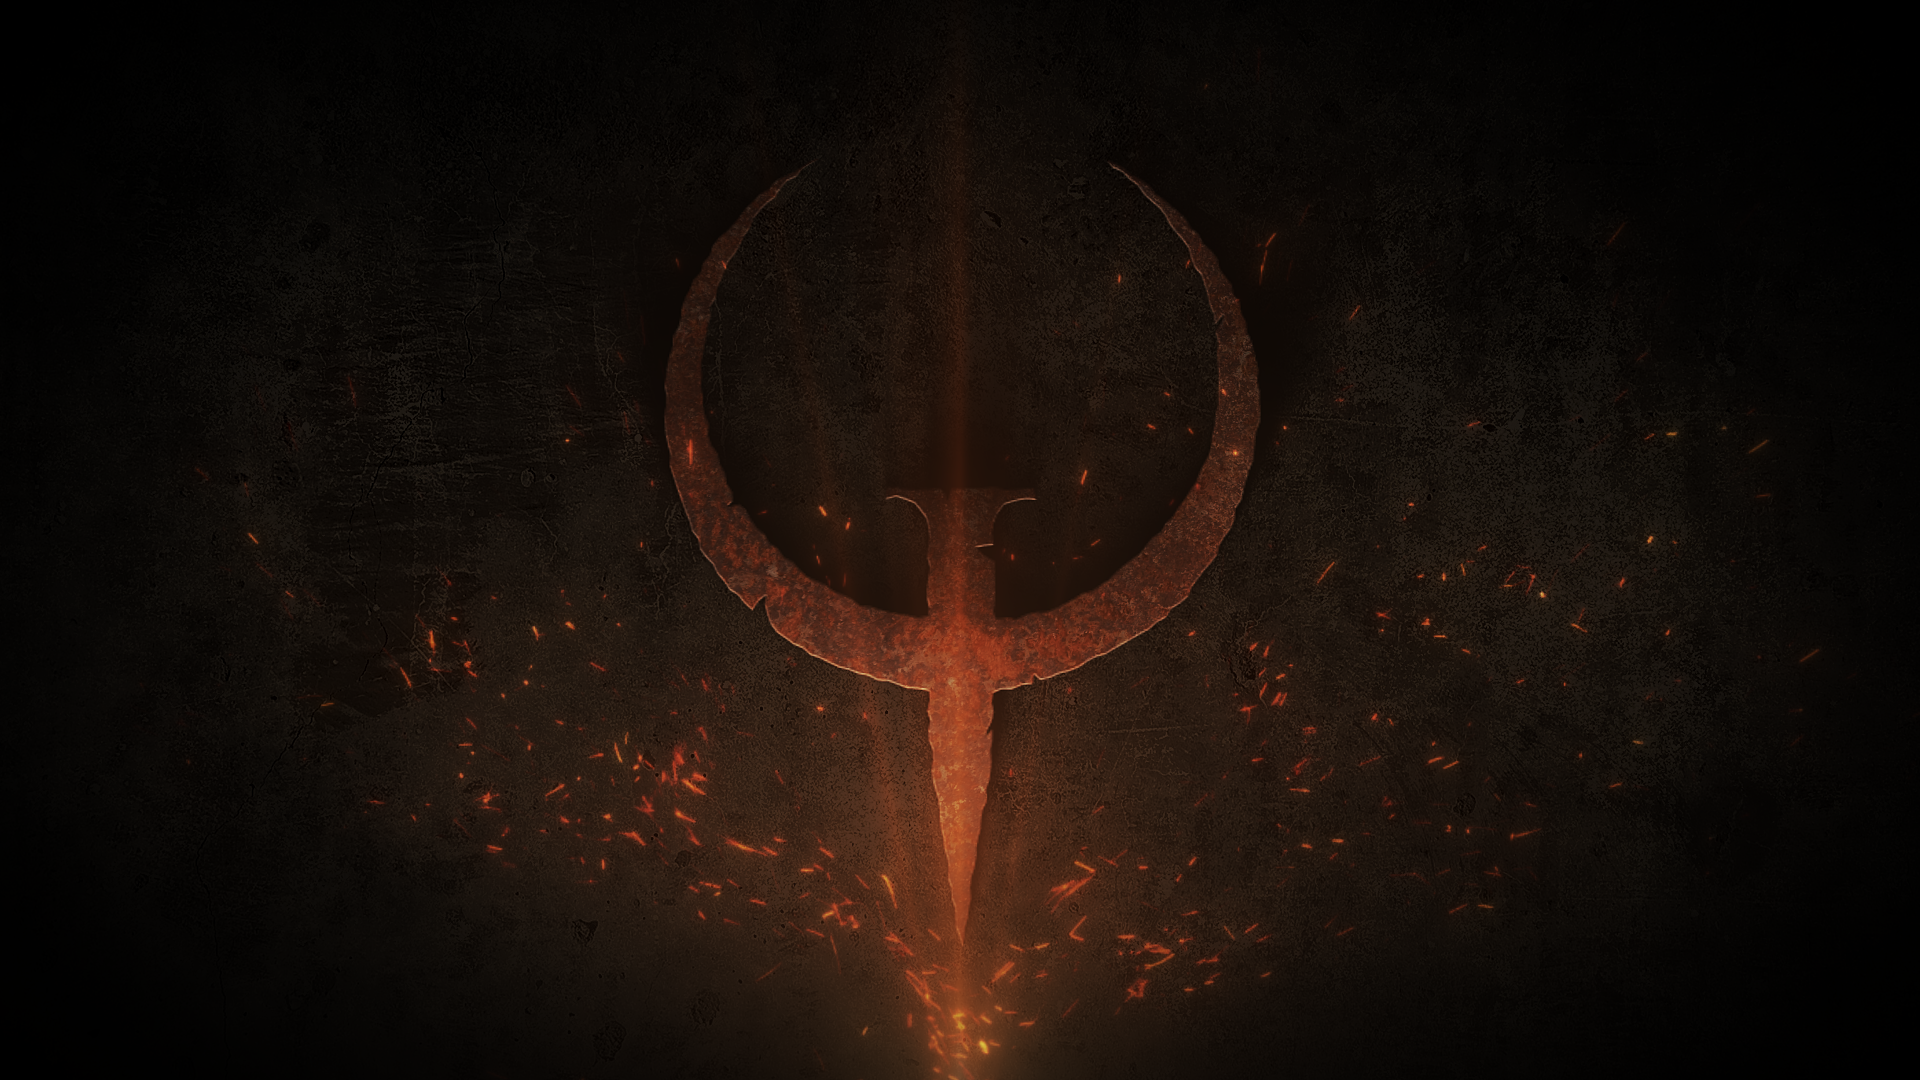 Quake Logo Wallpaper [HD] played the remaster, which inspired me to create this